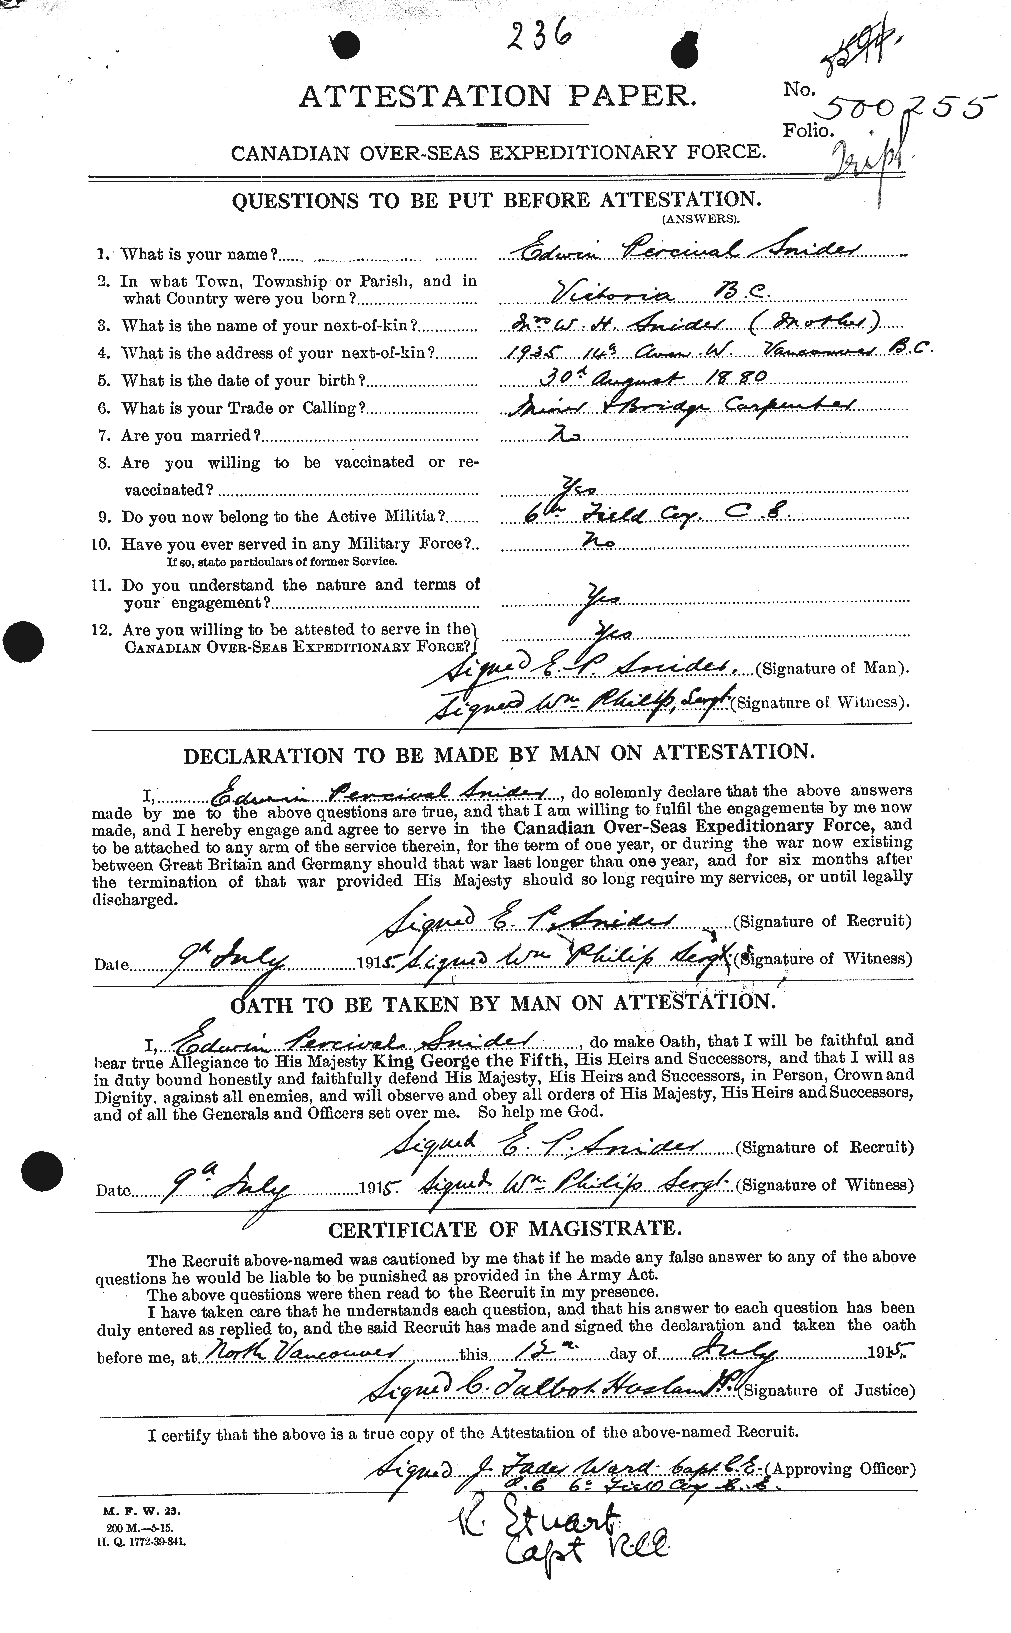 Personnel Records of the First World War - CEF 110048a